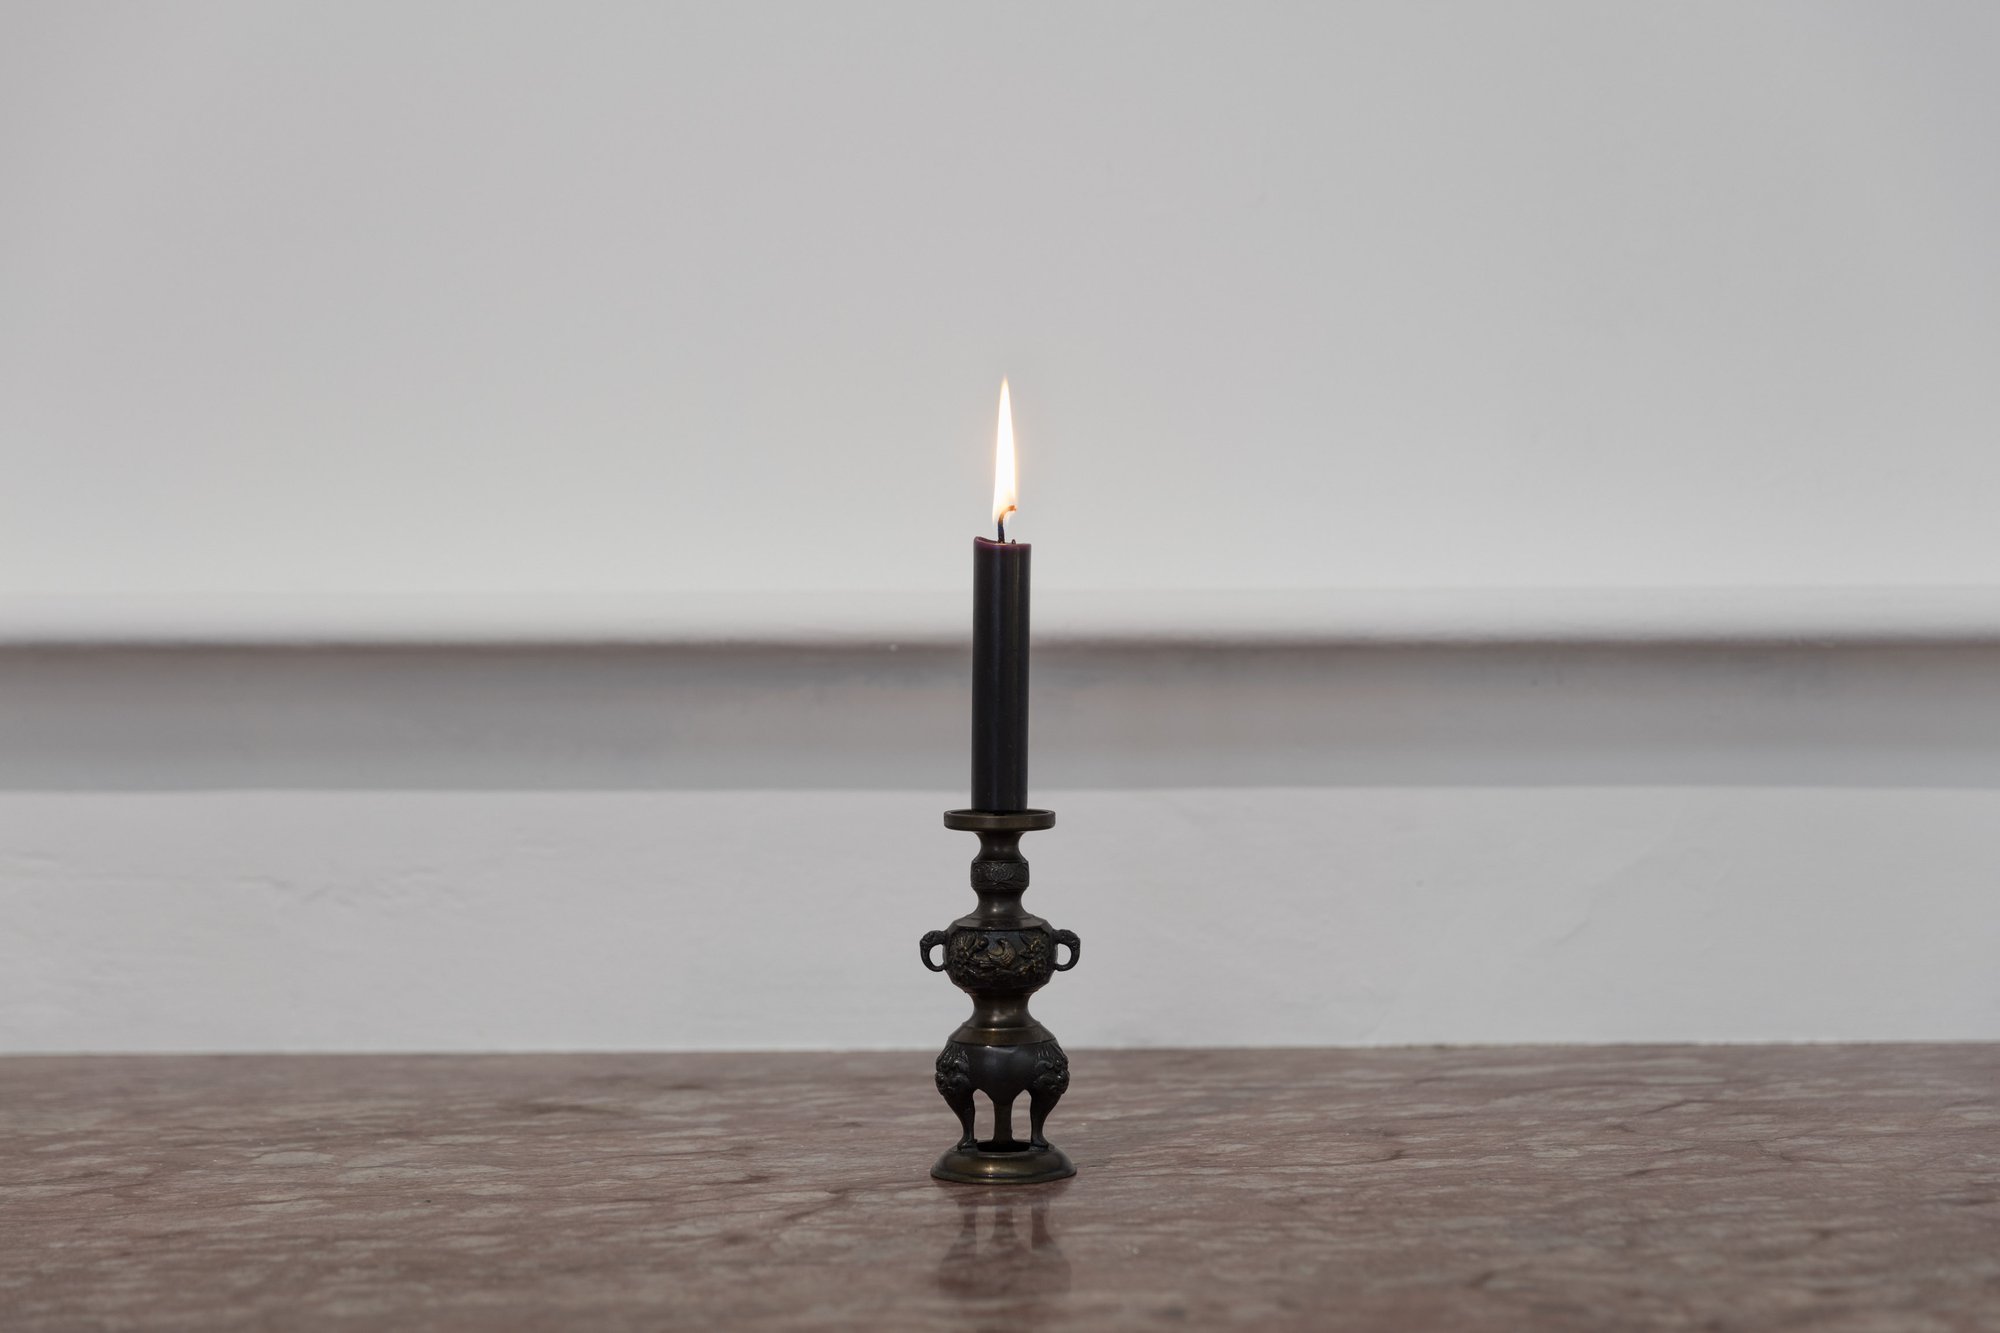 Haris Epaminonda, Untitled #01 a/w, detail, draped hand‐painted fabric (130 x 55 x 60 cm - 51 1/8 x 21 5/8 x 23 5/8 in), powder‐coated steel frame, black candle, old bronze Japanese candle holder, dimensions variable, 2016